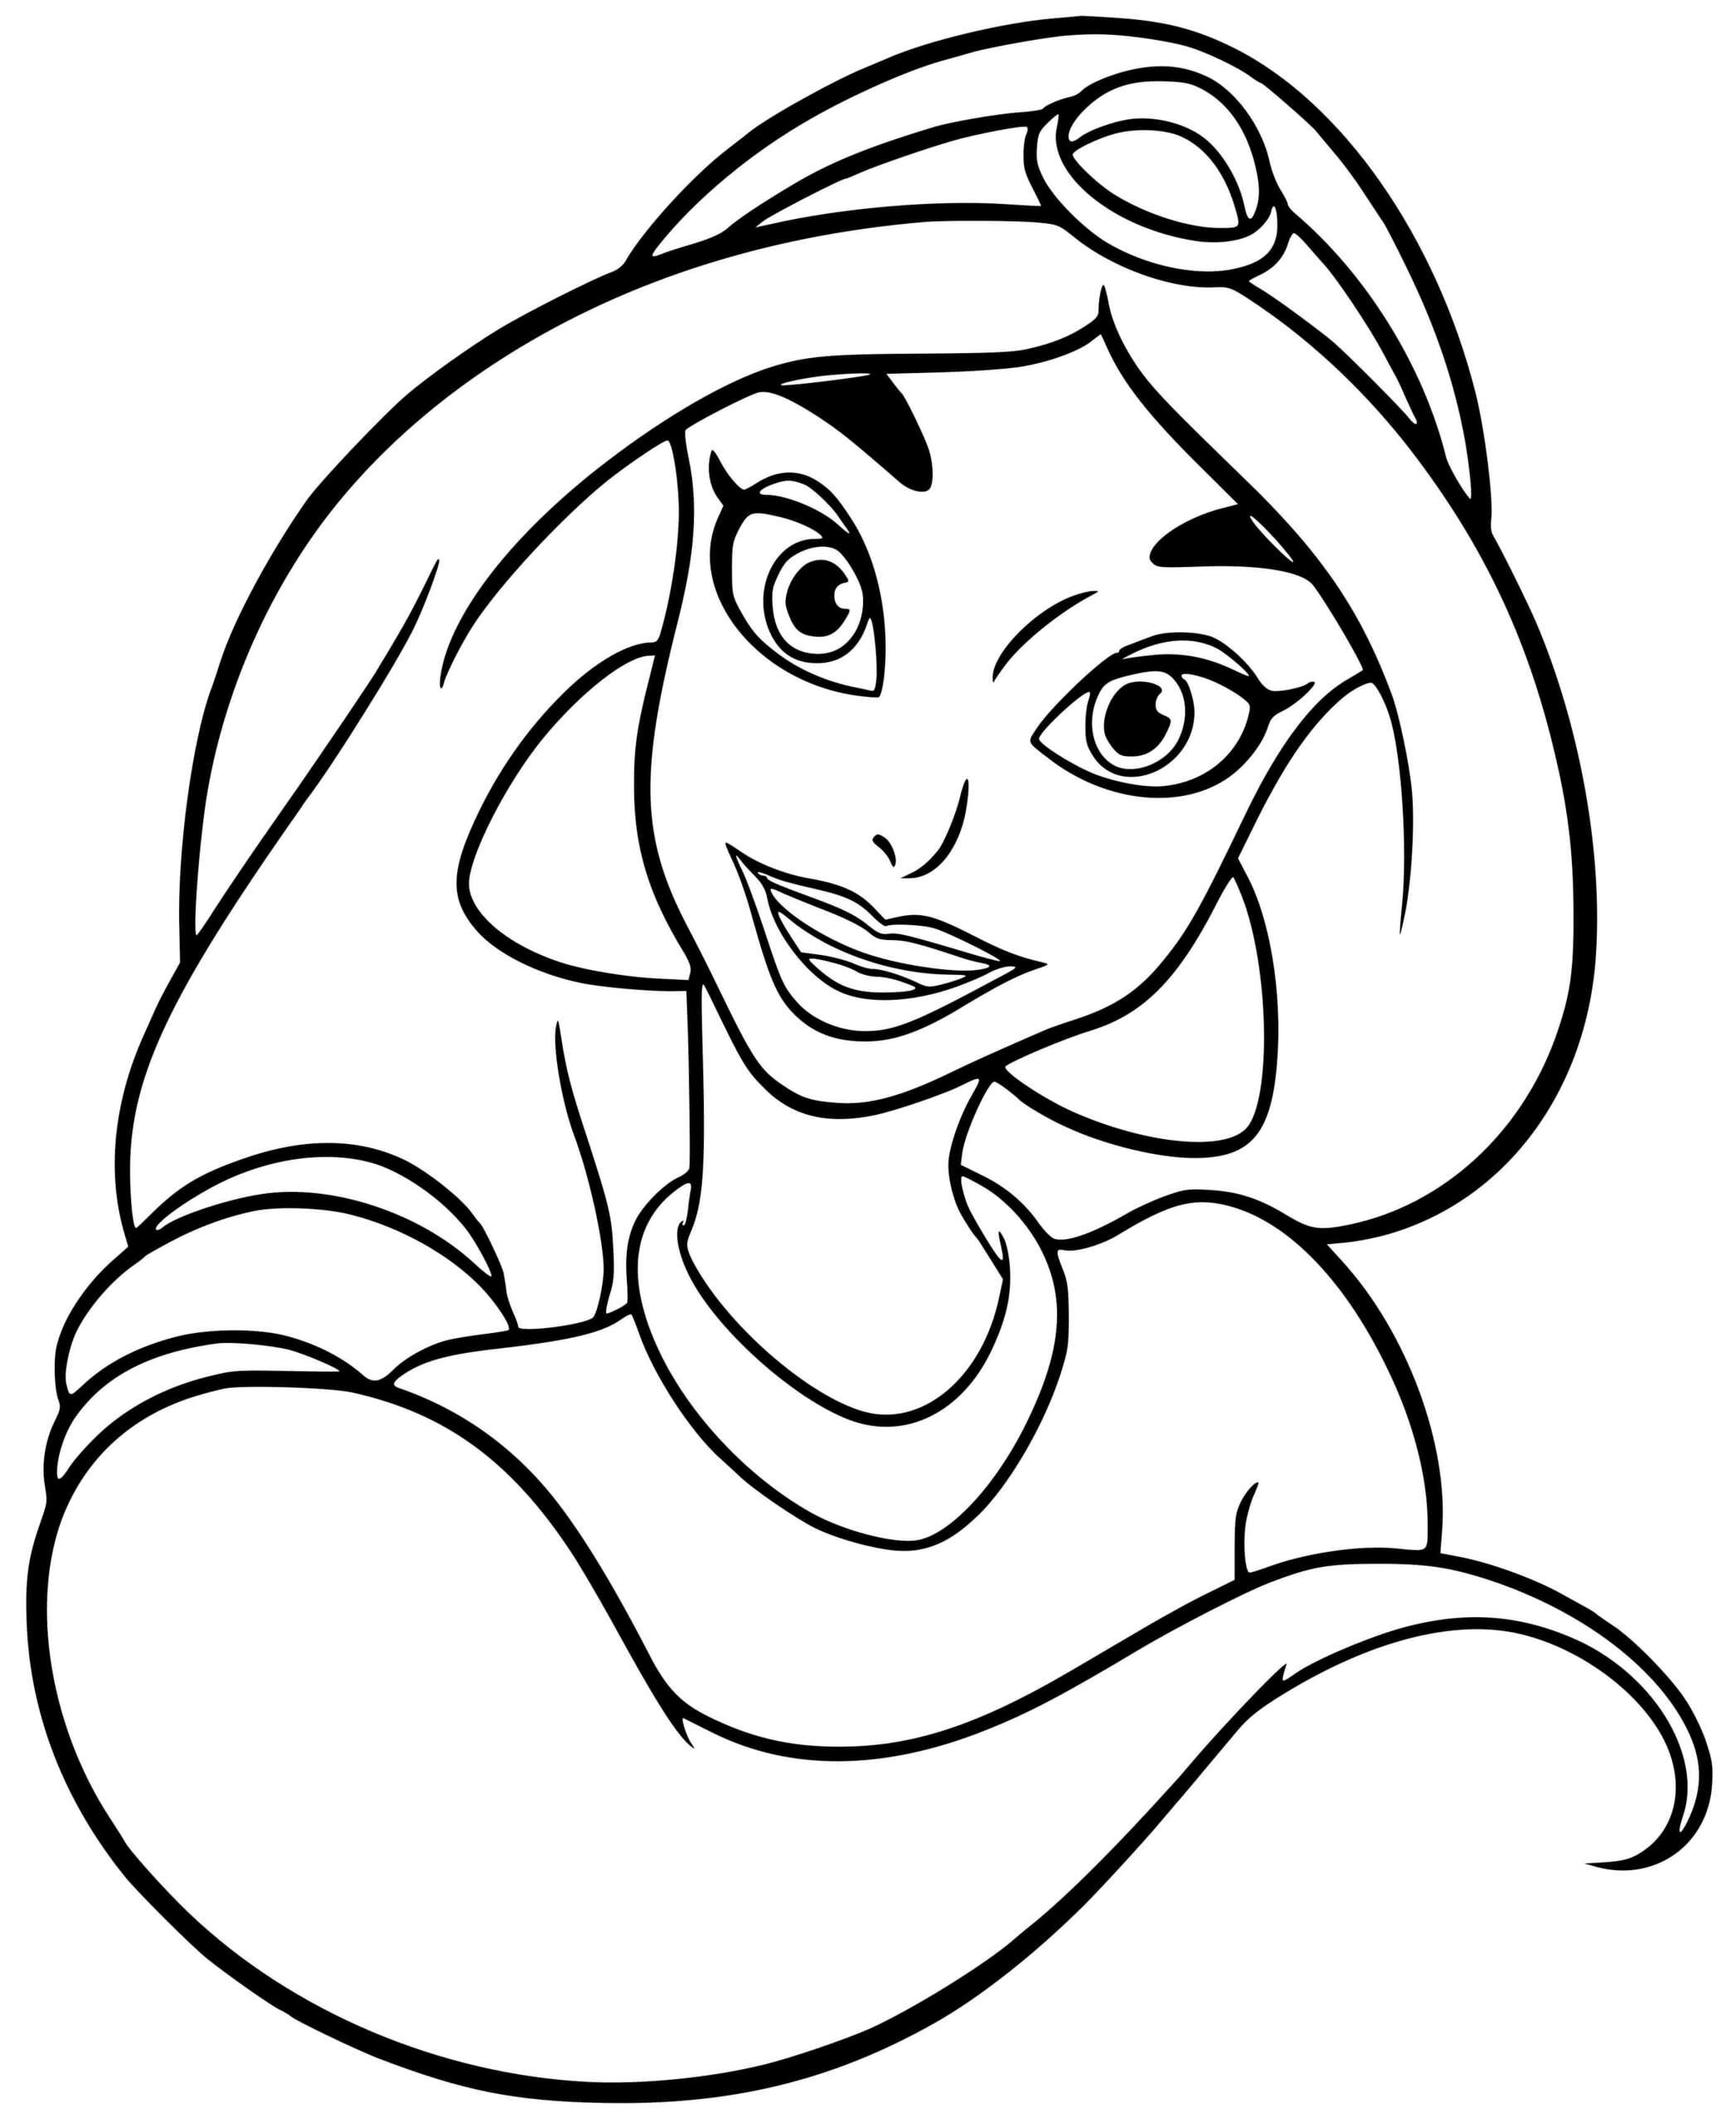 Disney Princess Jasmine From Aladdin Coloring Pages   Coloring Cool